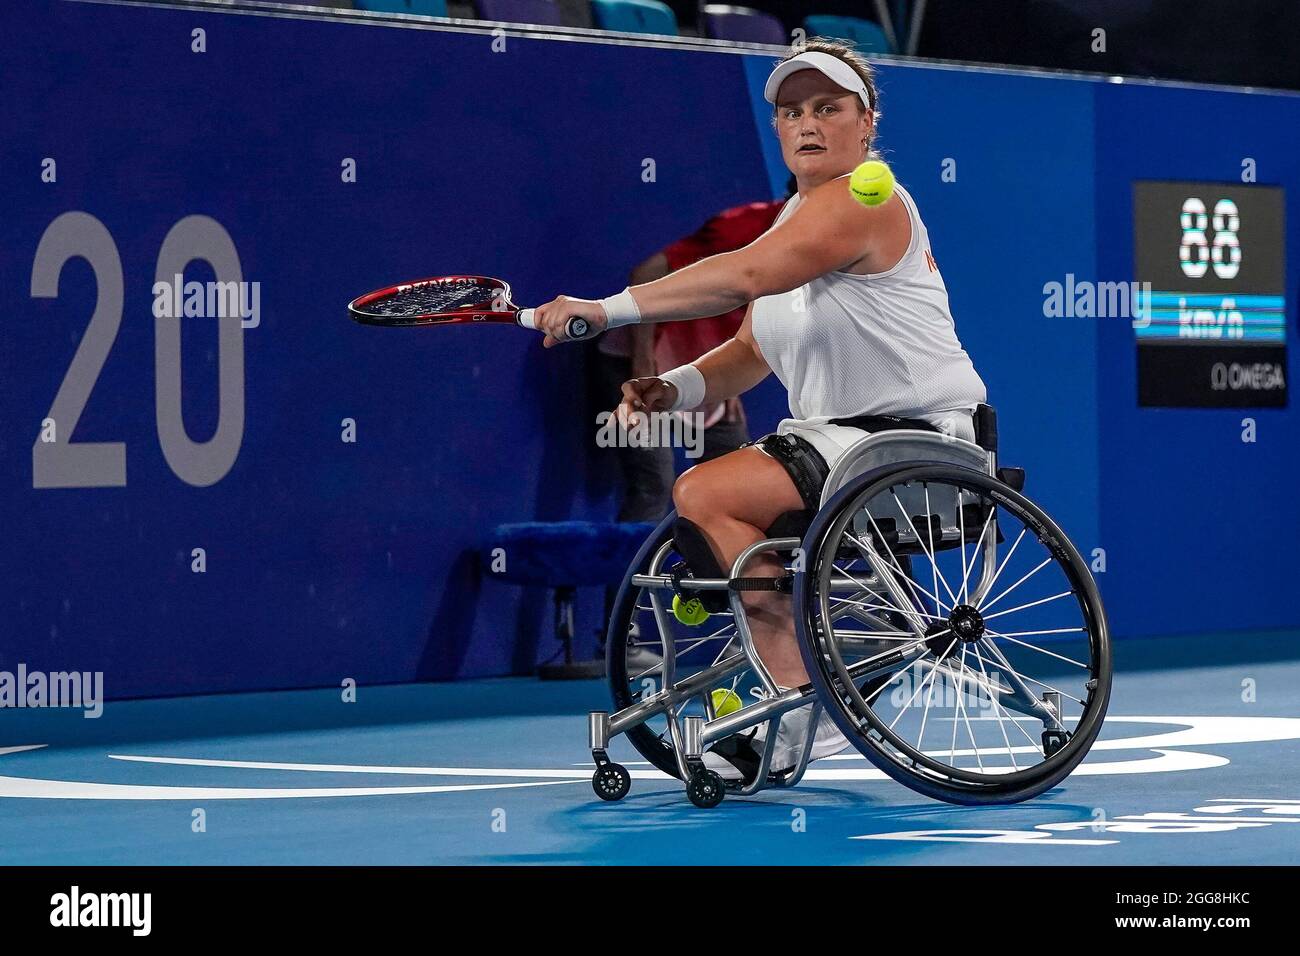 TOKYO, JAPAN - AUGUST 30: Aniek van Kooten of The Netherlands competing  against Emmanuelle Morch of France on Wheelchair Tennis Singles Second  Round during the Tokyo 2020 Paralympic Games at Ariake Tennis